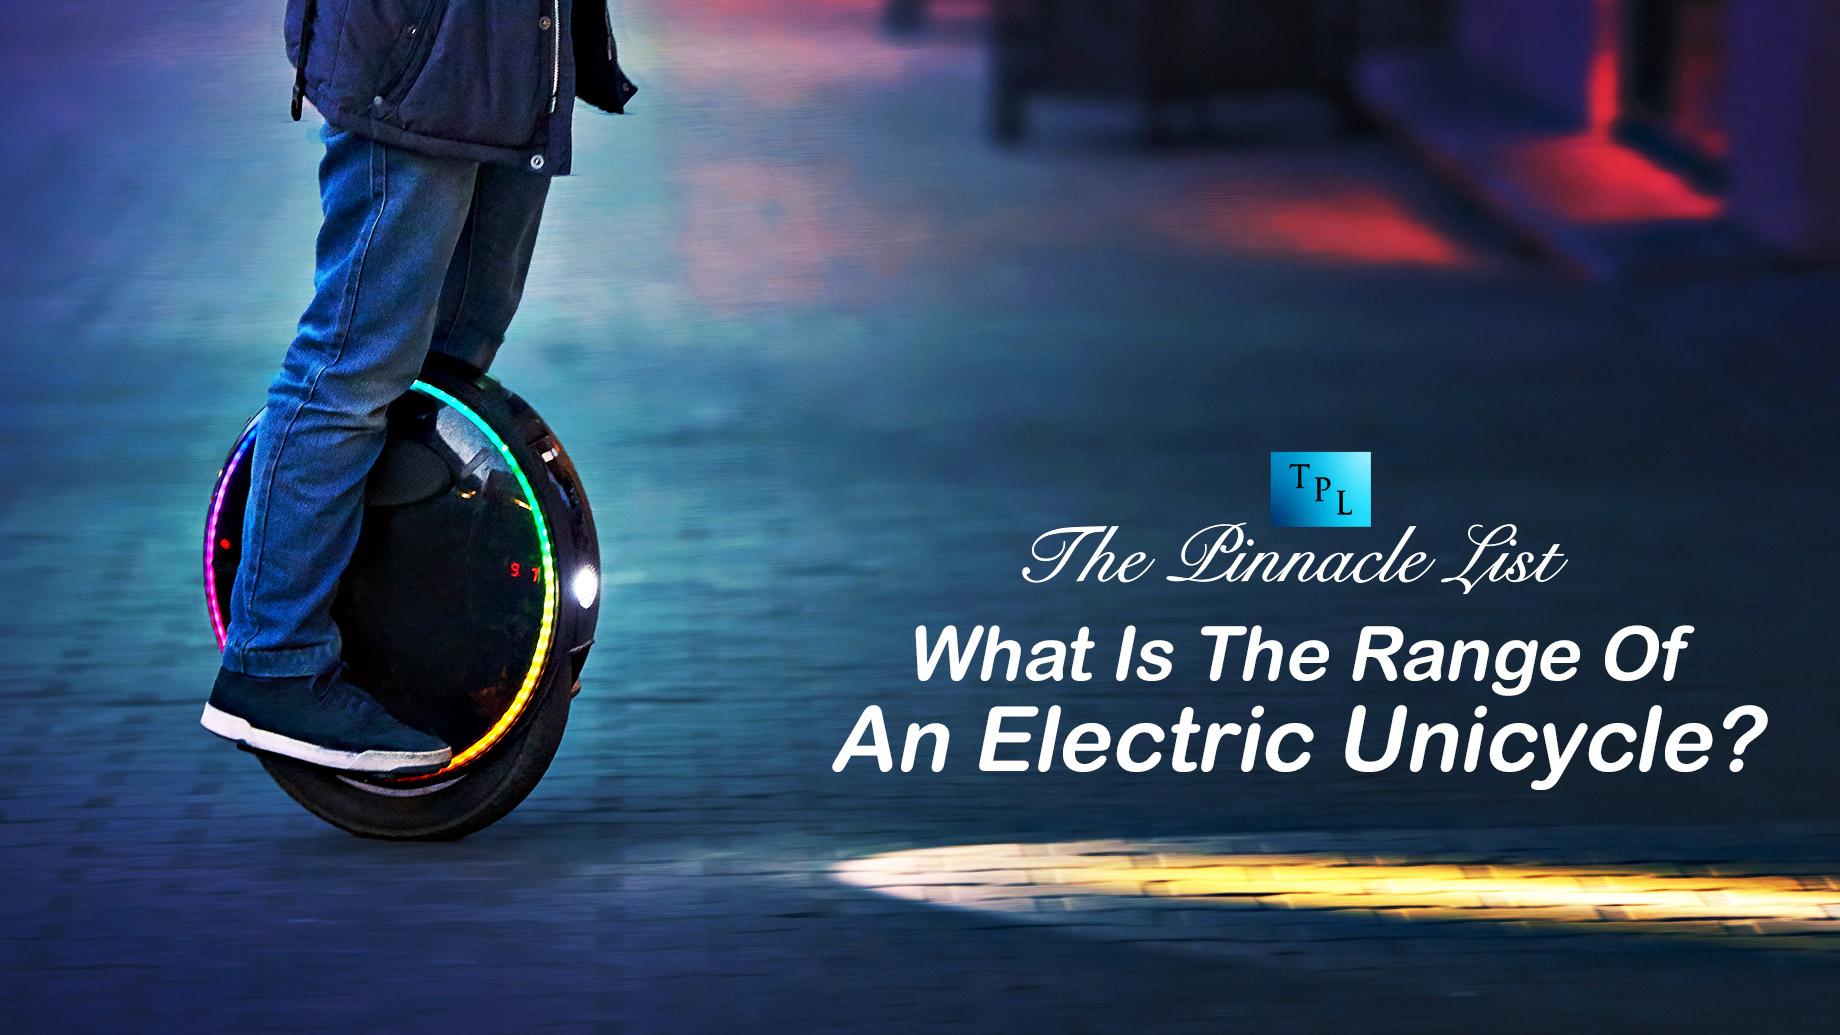 What Is The Range Of An Electric Unicycle?